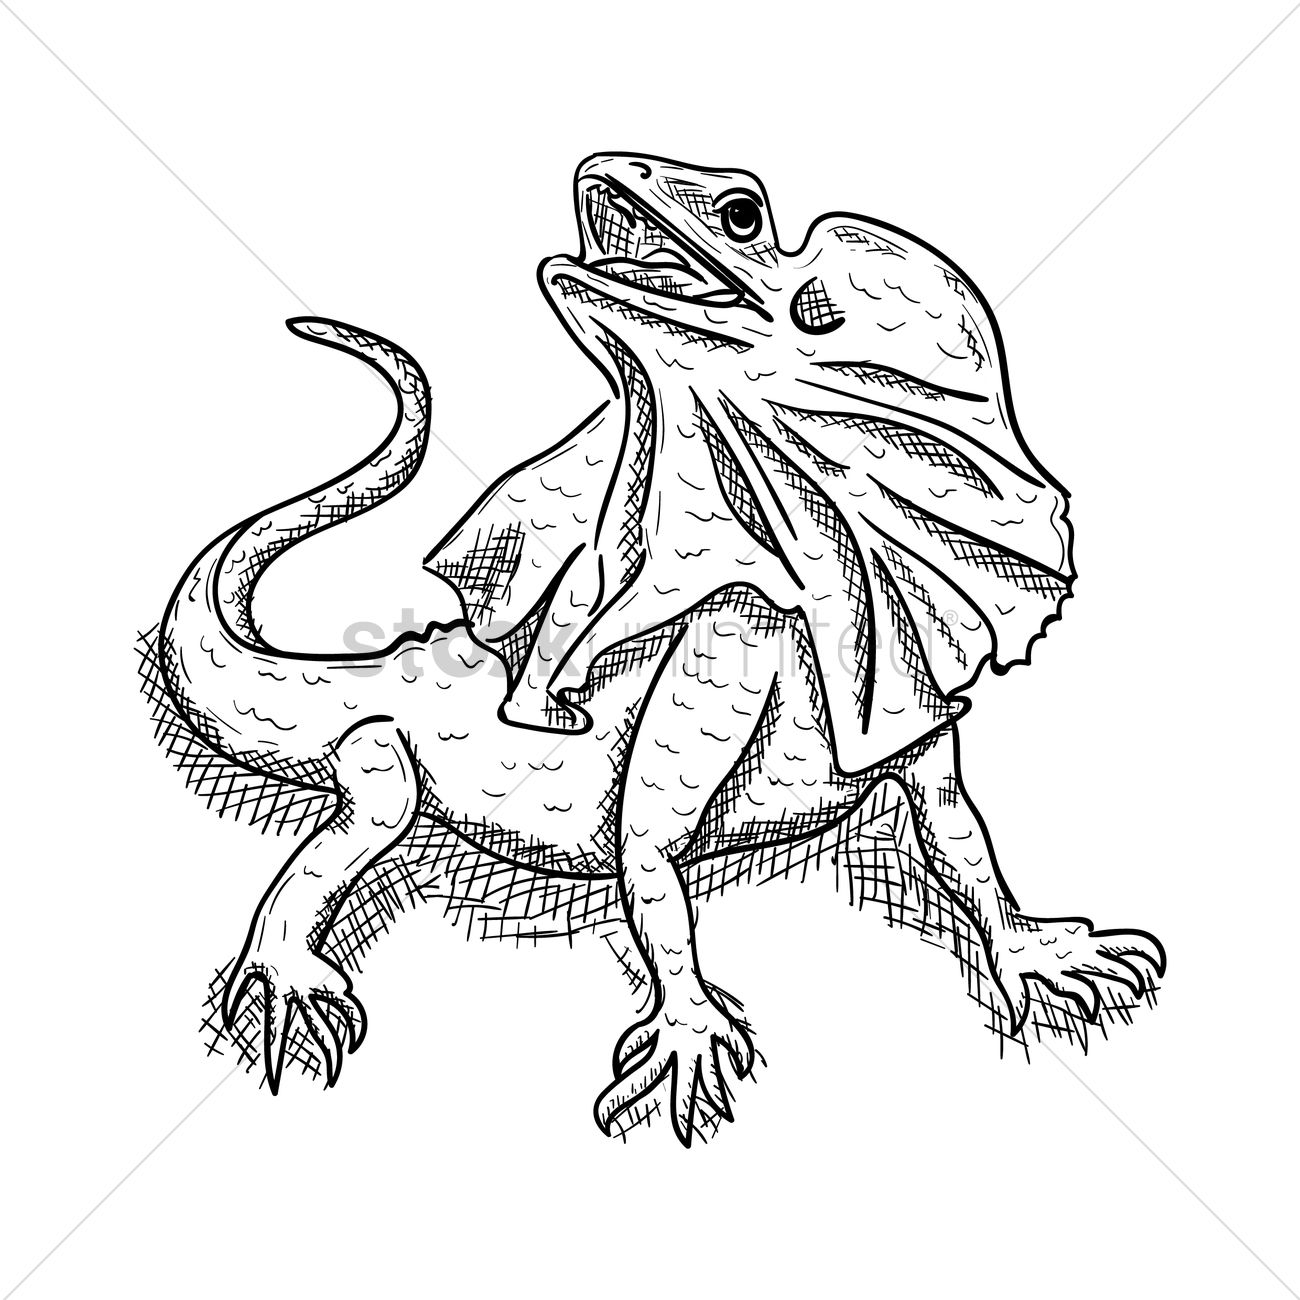 Best Lizard Sketch Drawing with Realistic